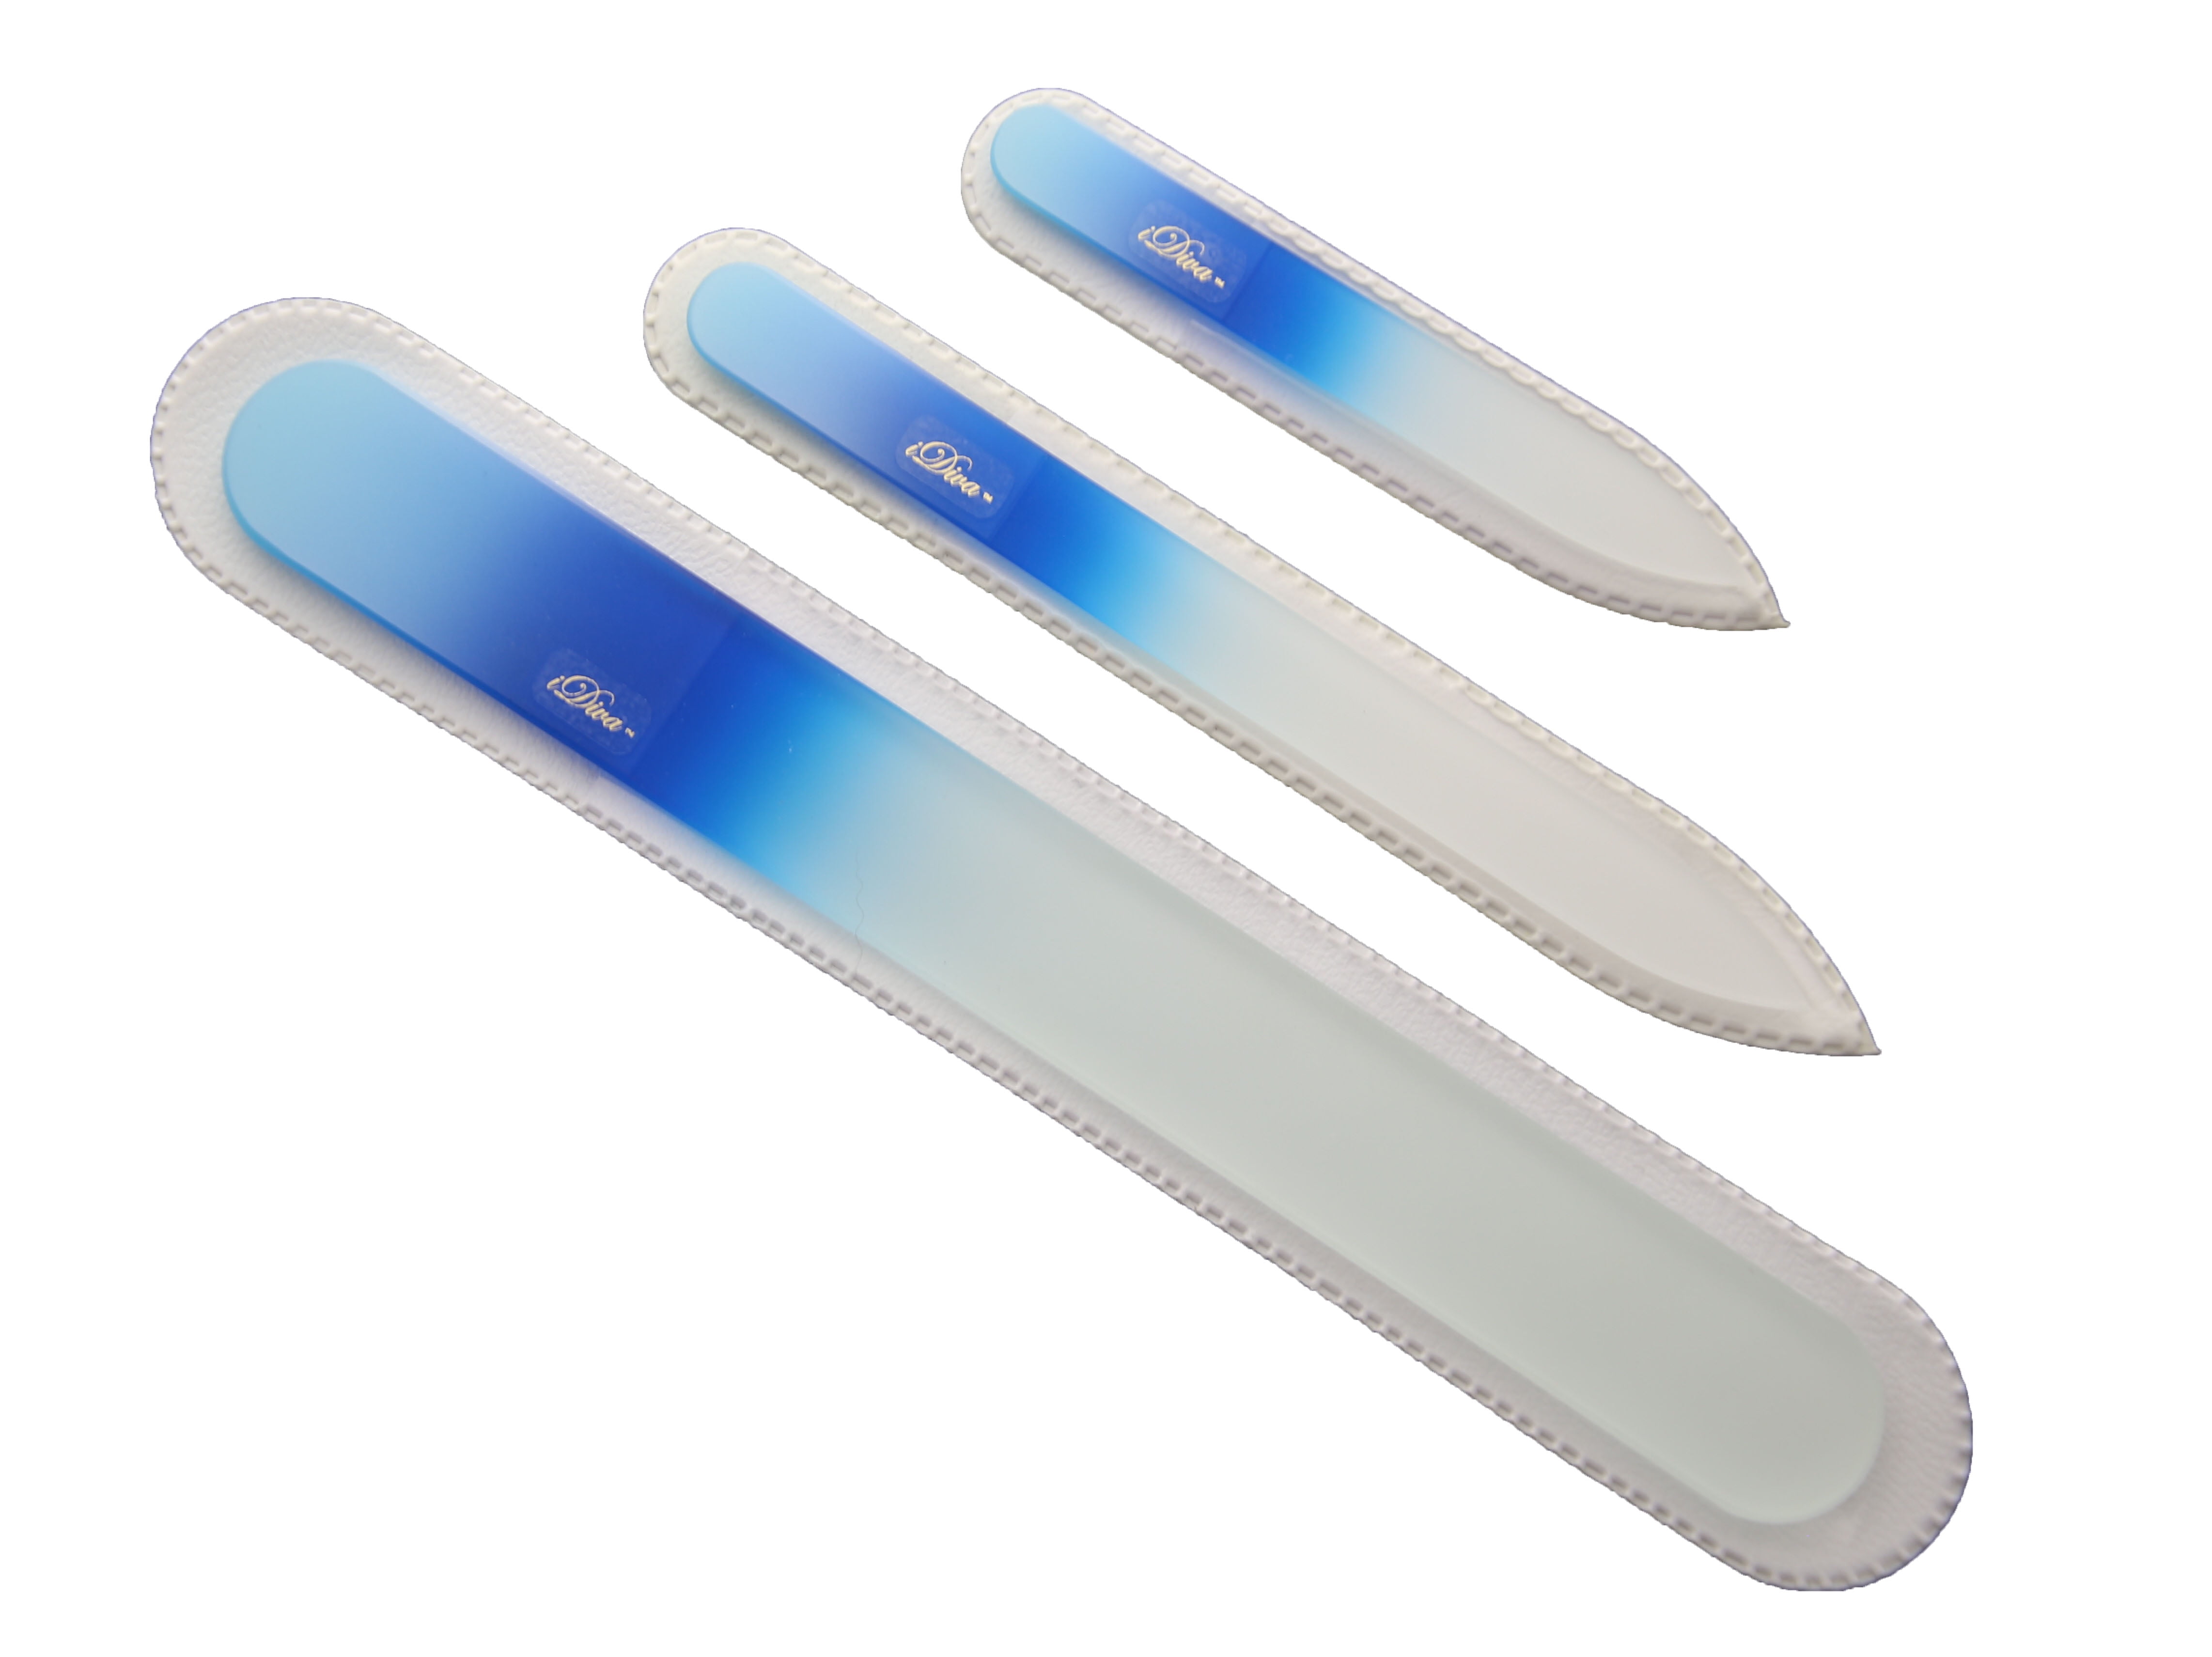 Shop Genuine Czech Glass Nail Files and Nail Tools